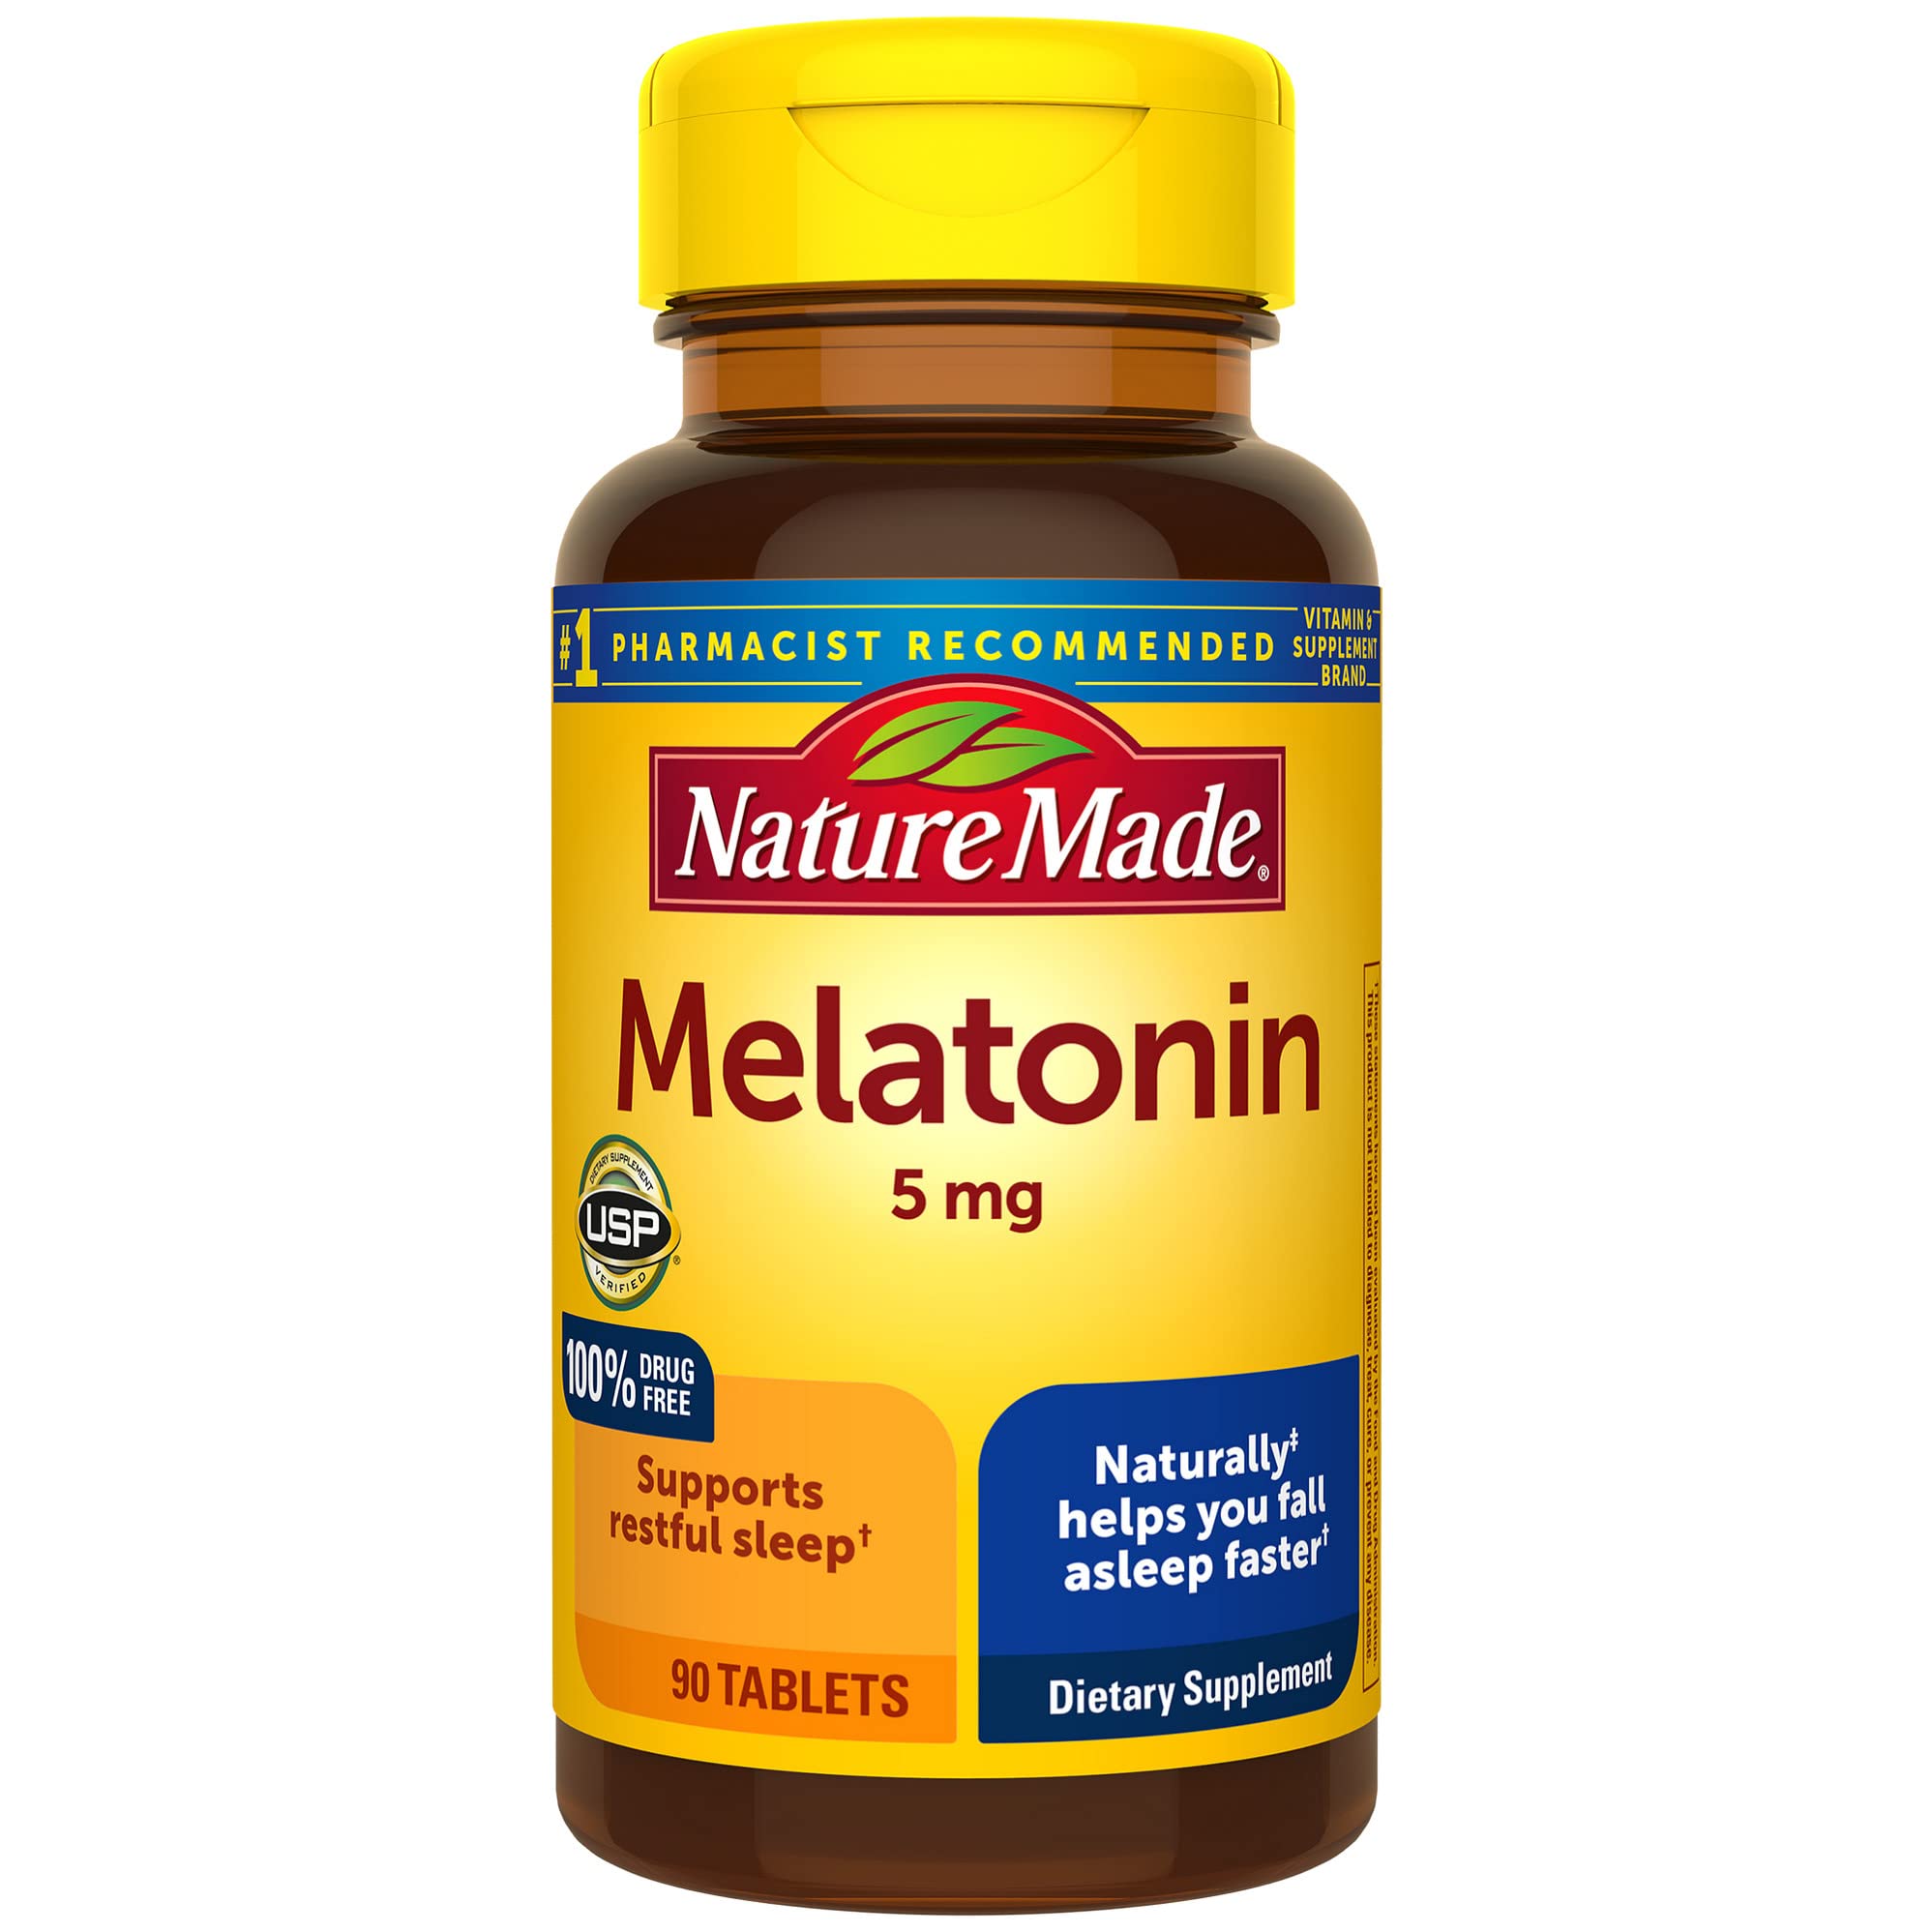 Nature Made Melatonin 5mg Tablets, 100% Drug Free Sleep Aid for Adults, 90 Tablets, 90 Day Supply